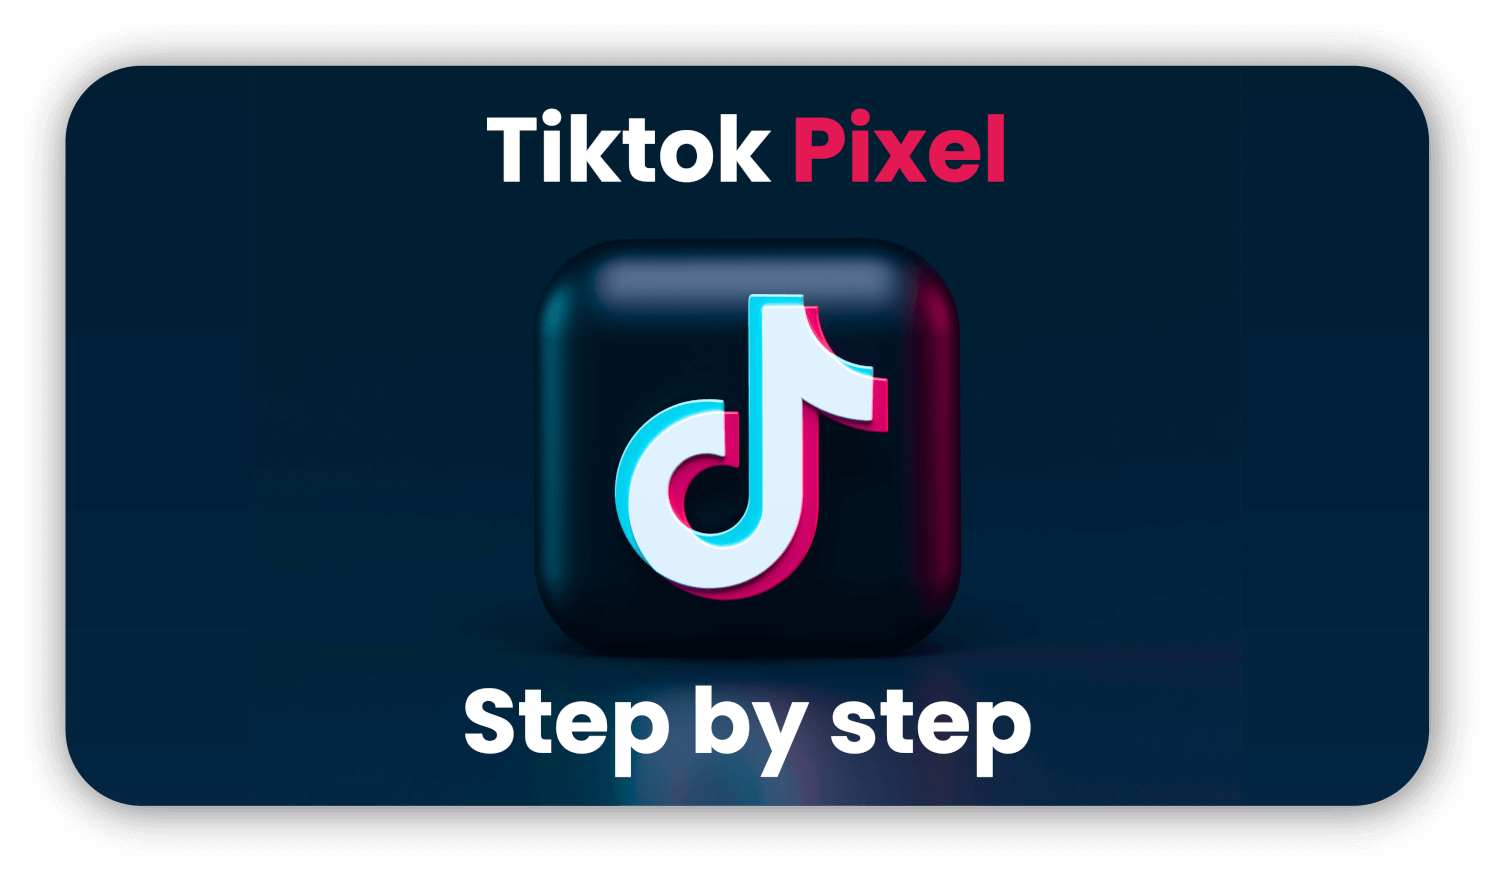 TikTok Pixel: How to Set it Up in 2 Easy Steps